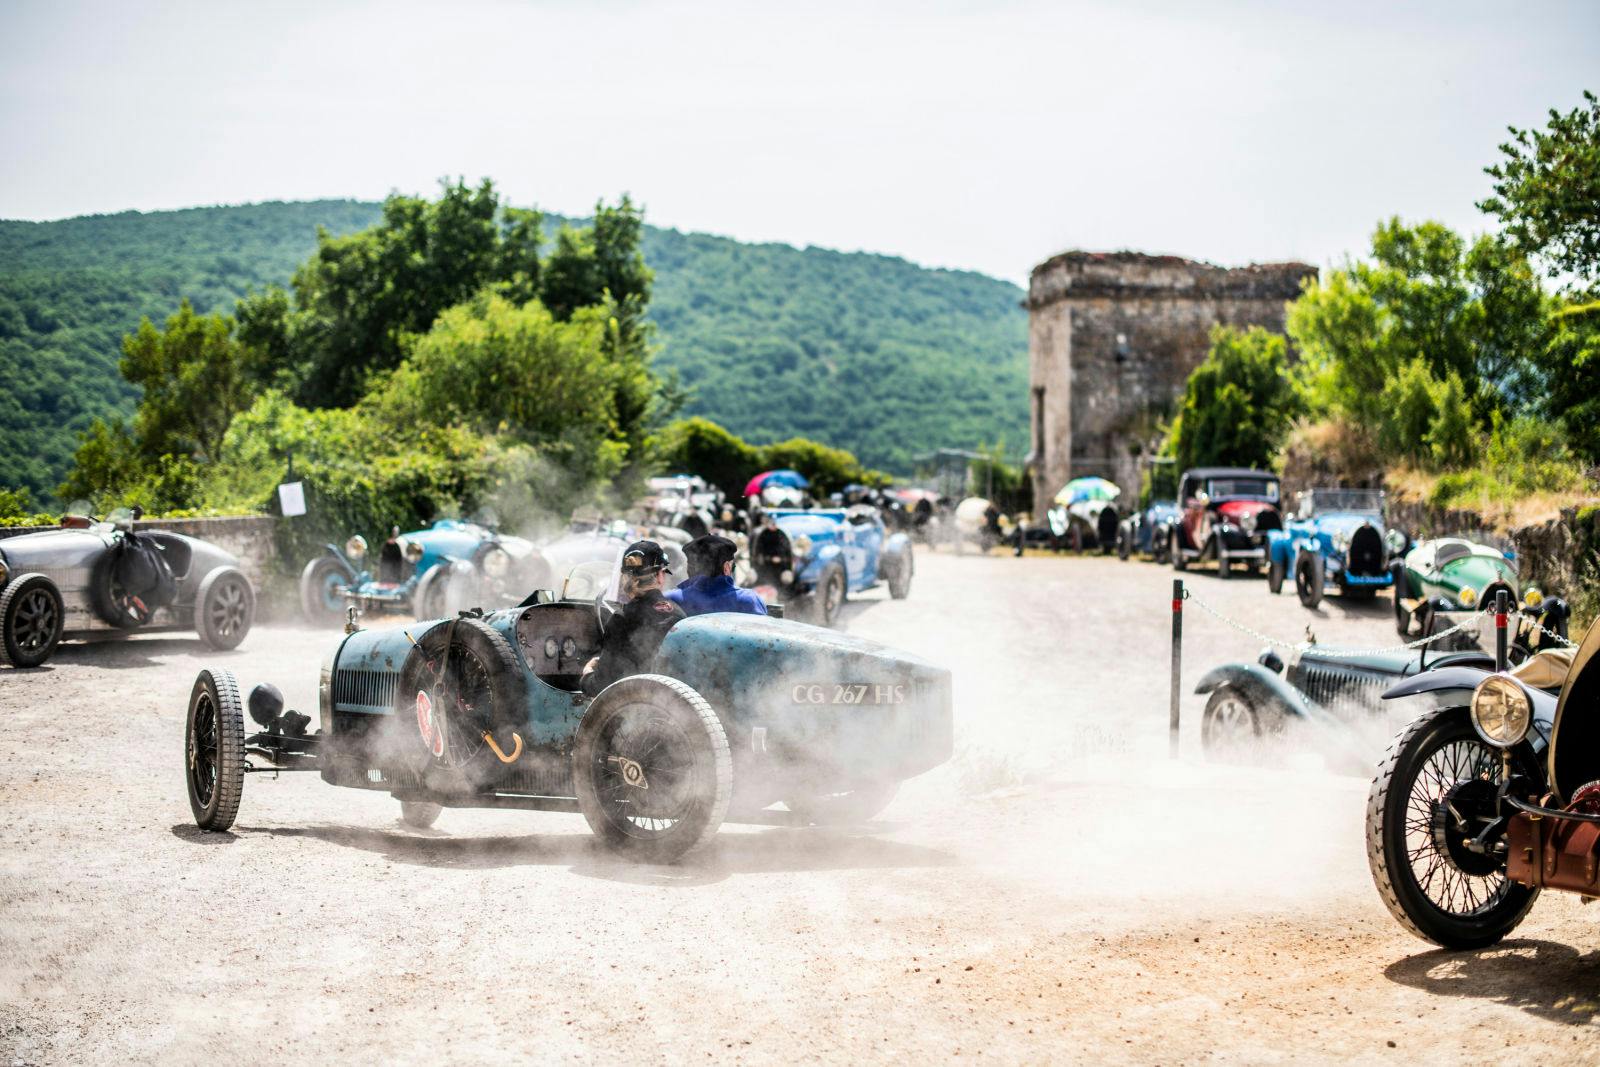 108 Bugatti pre-war automobiles gathered in south of France from 12-19 June for the annual International Bugatti Meeting, this year organized by Club Bugatti France. 